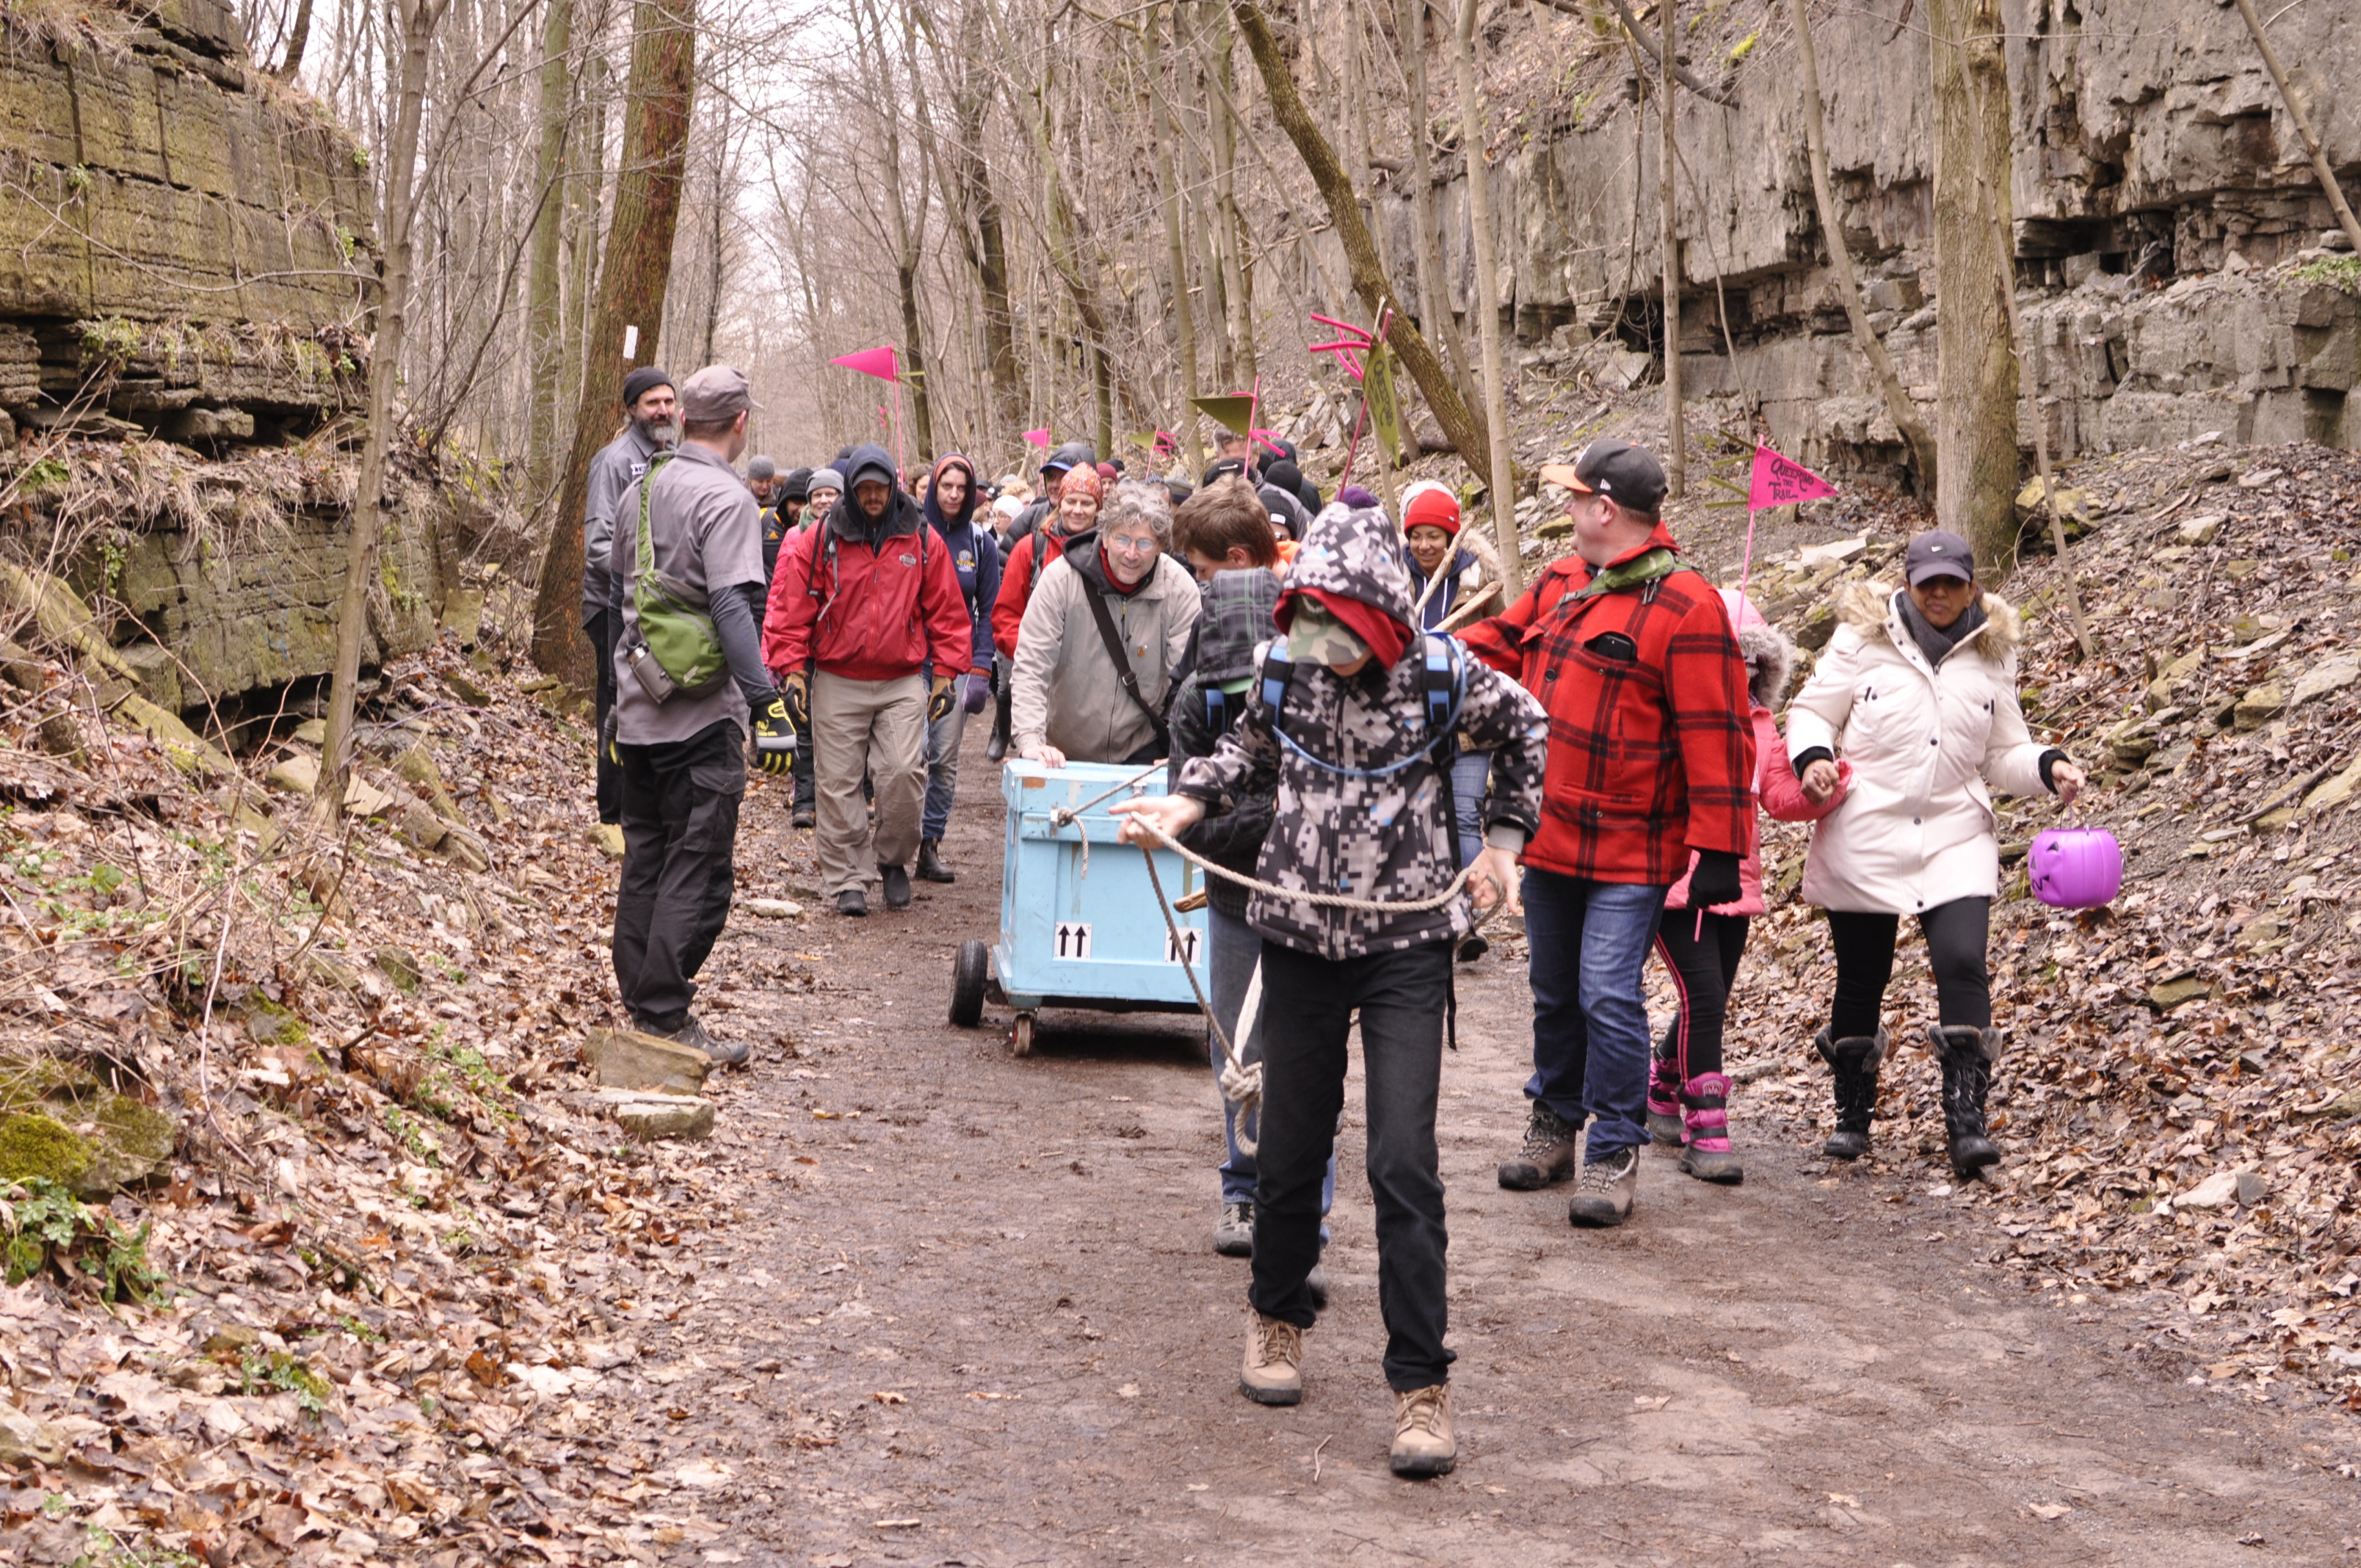 Stone Walk on the Bruce Trail: Queering the Trail